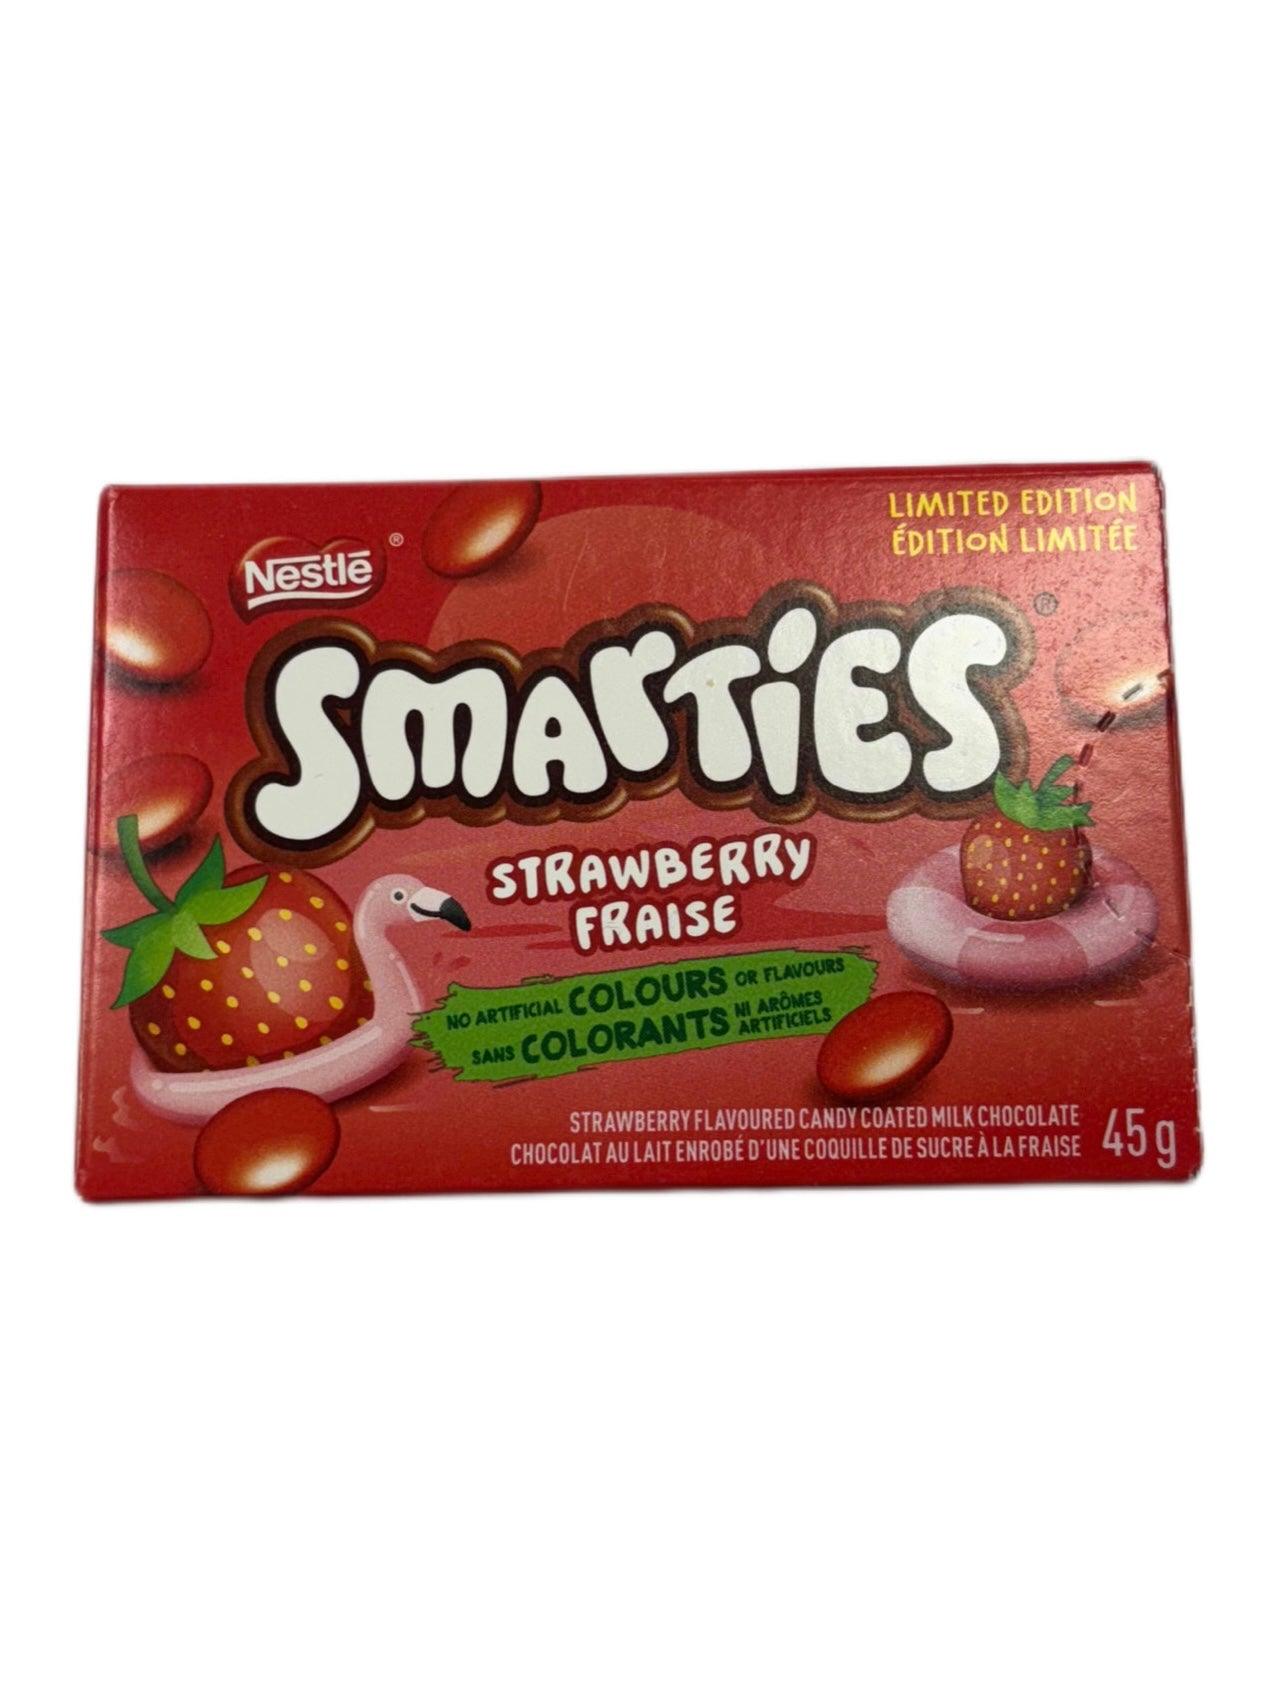 Smarties Strawberry 45G Limited Edition - Extreme Snacks